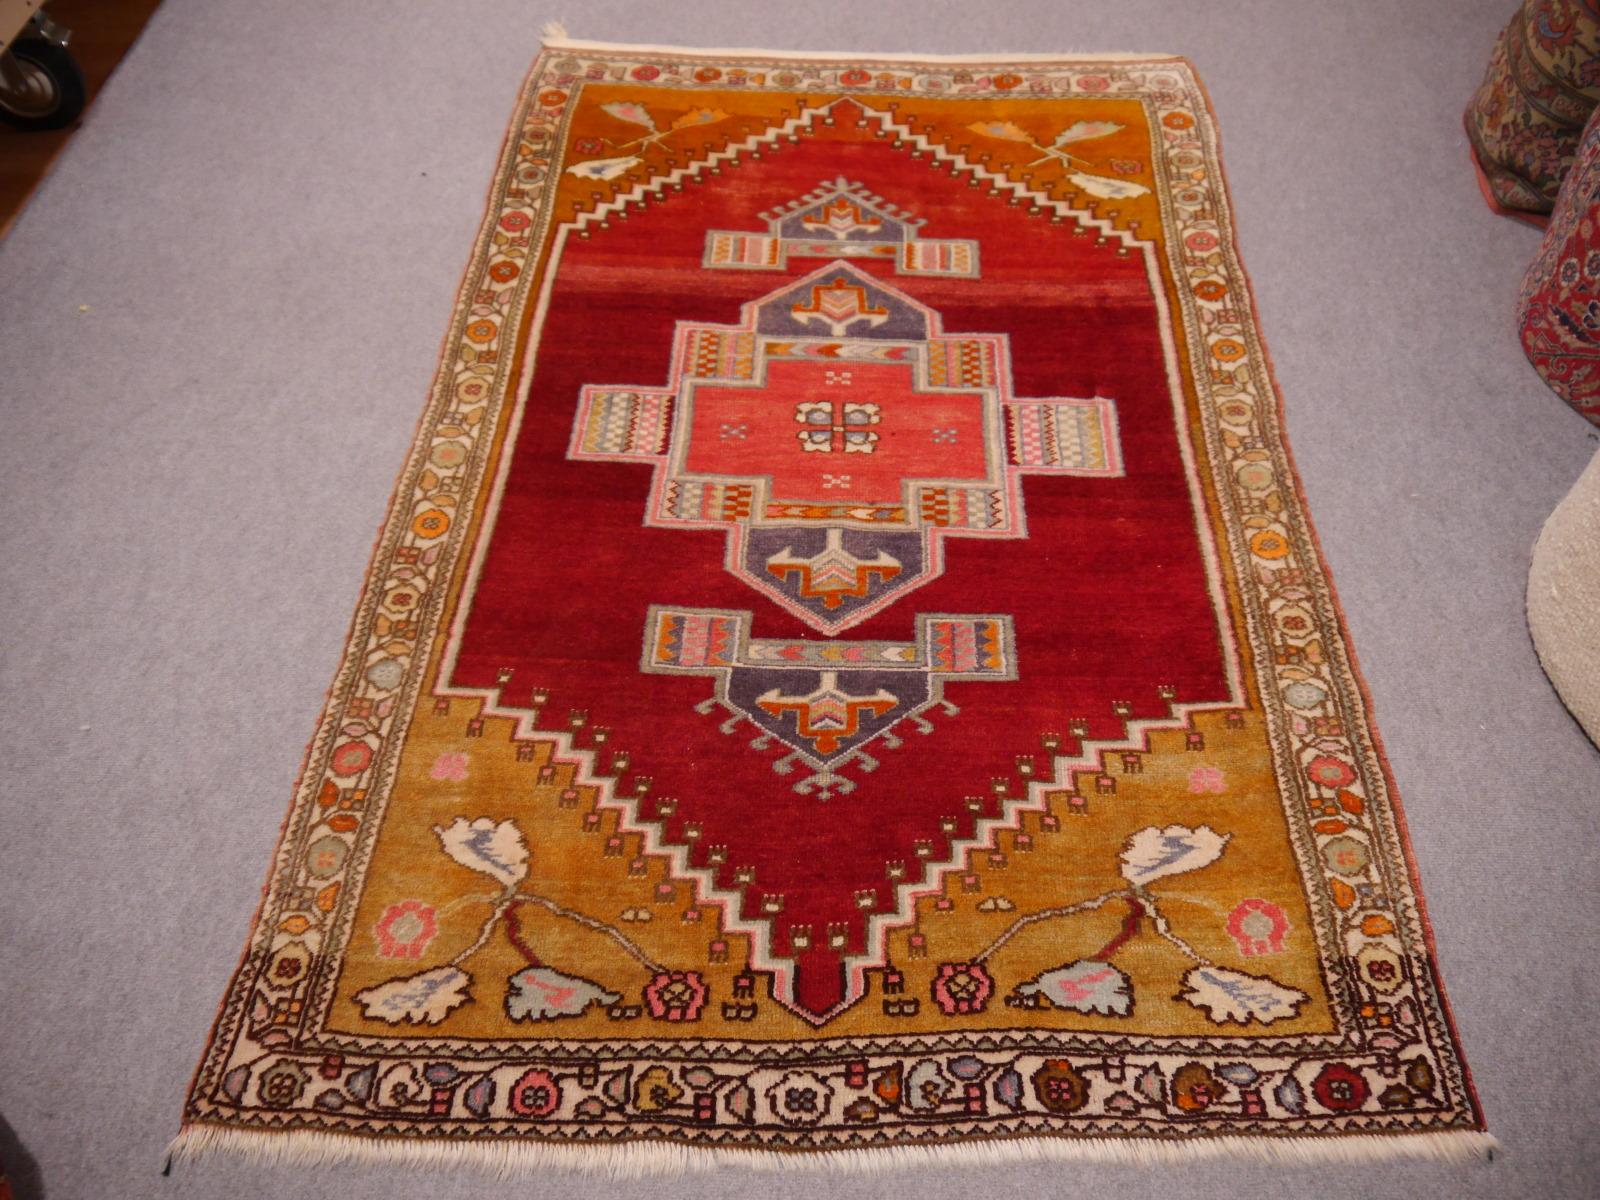 Beautiful Turkish Yoruk rug with archaic design. Very good condition.

The Djoharian Design Collection is located in Germany, all our rugs are shipped from there. We are licensed FAIR-TRADE partner of LABEL STEP FAIR TRADE CARPETS. Label STEP is the